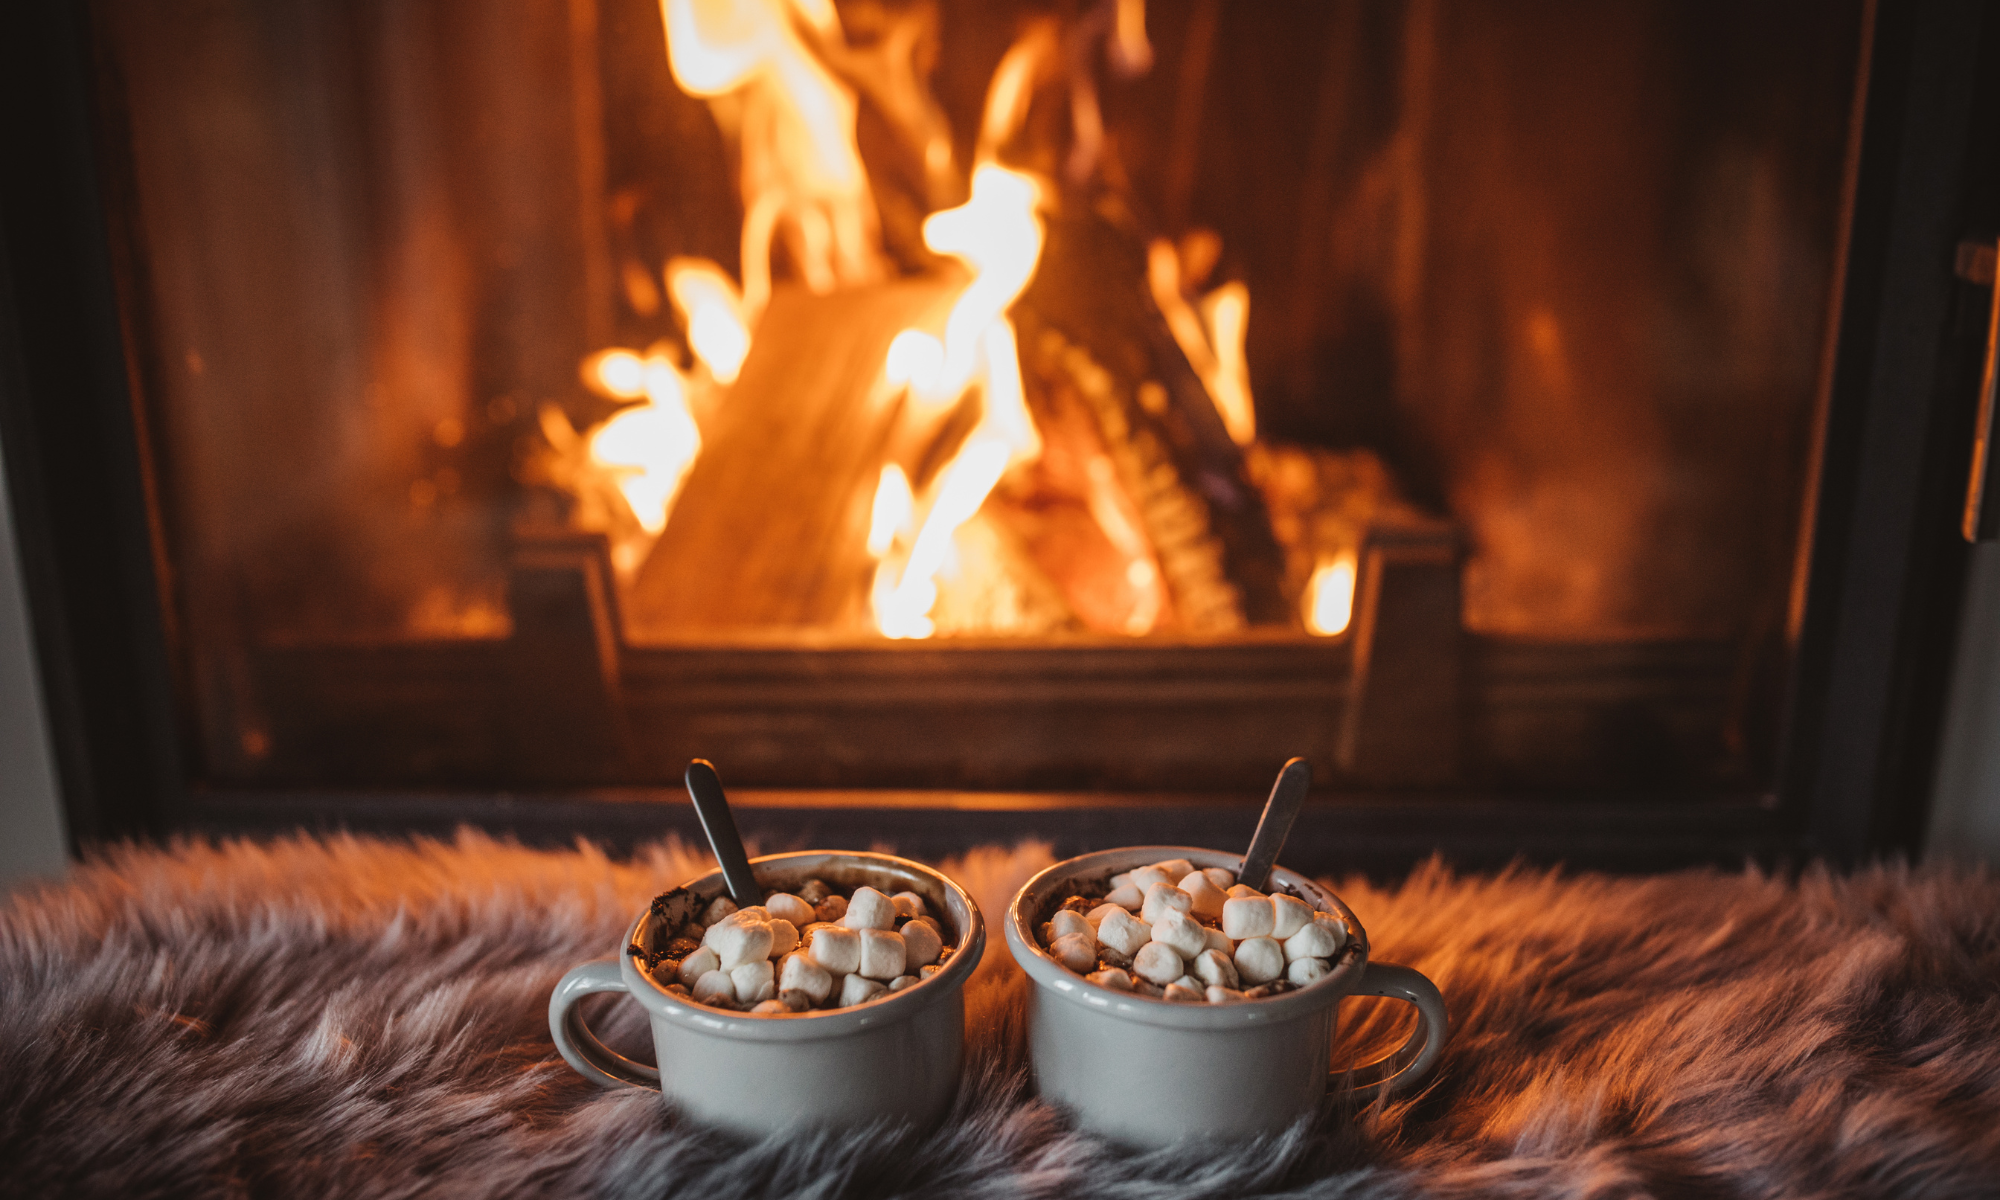 Fire and hot chocolates